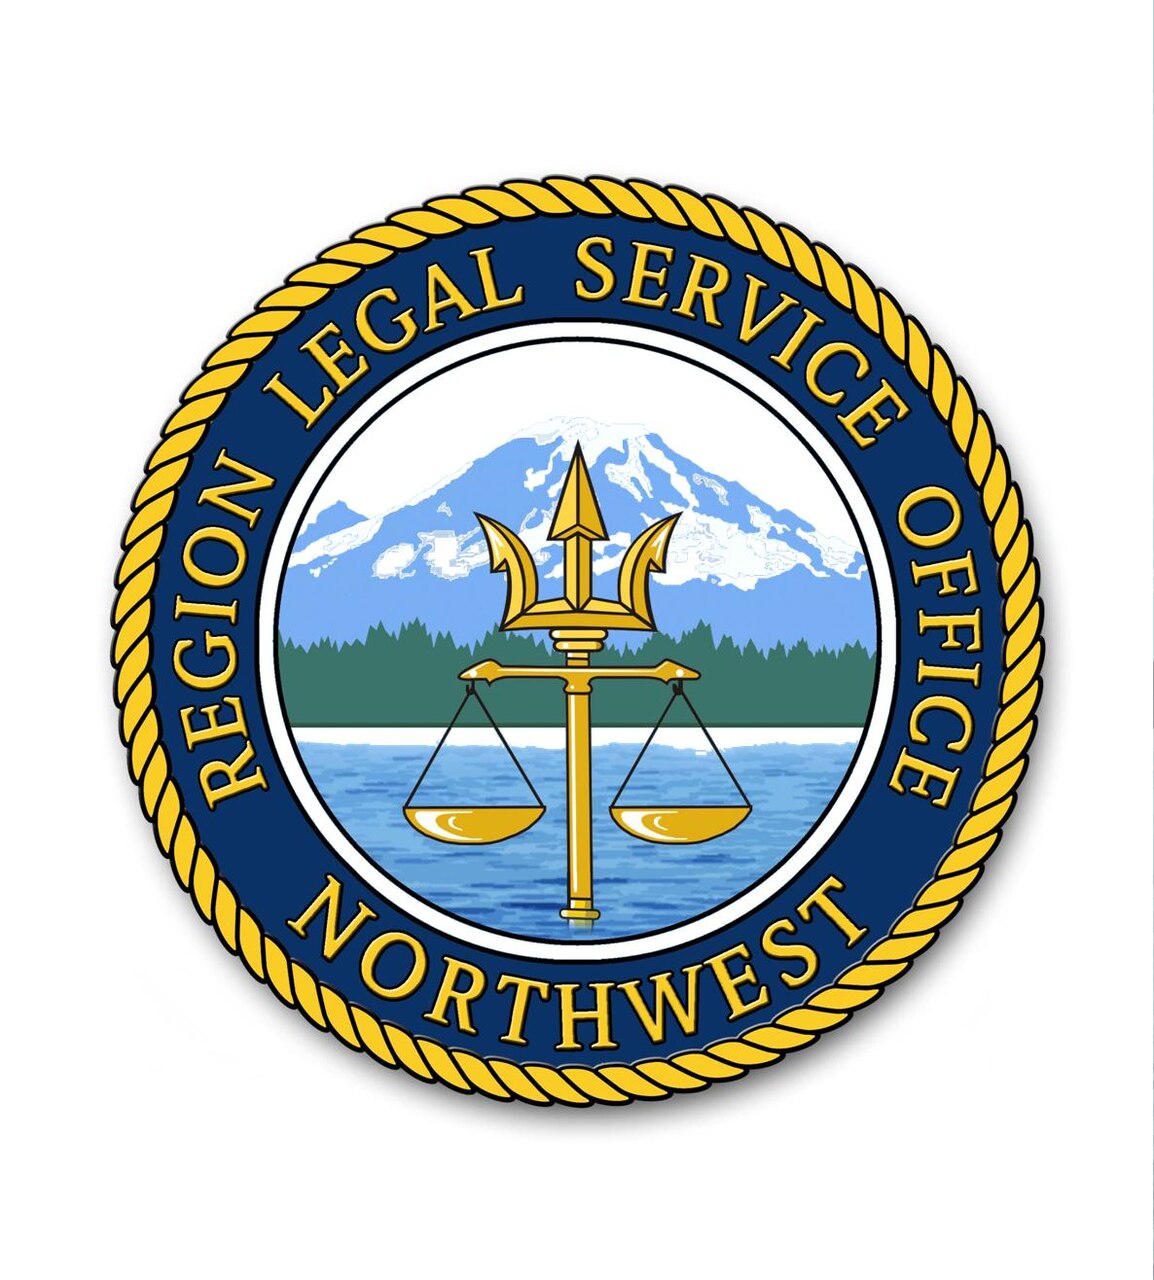 Region Legal Service Office (RLSO) Midwest